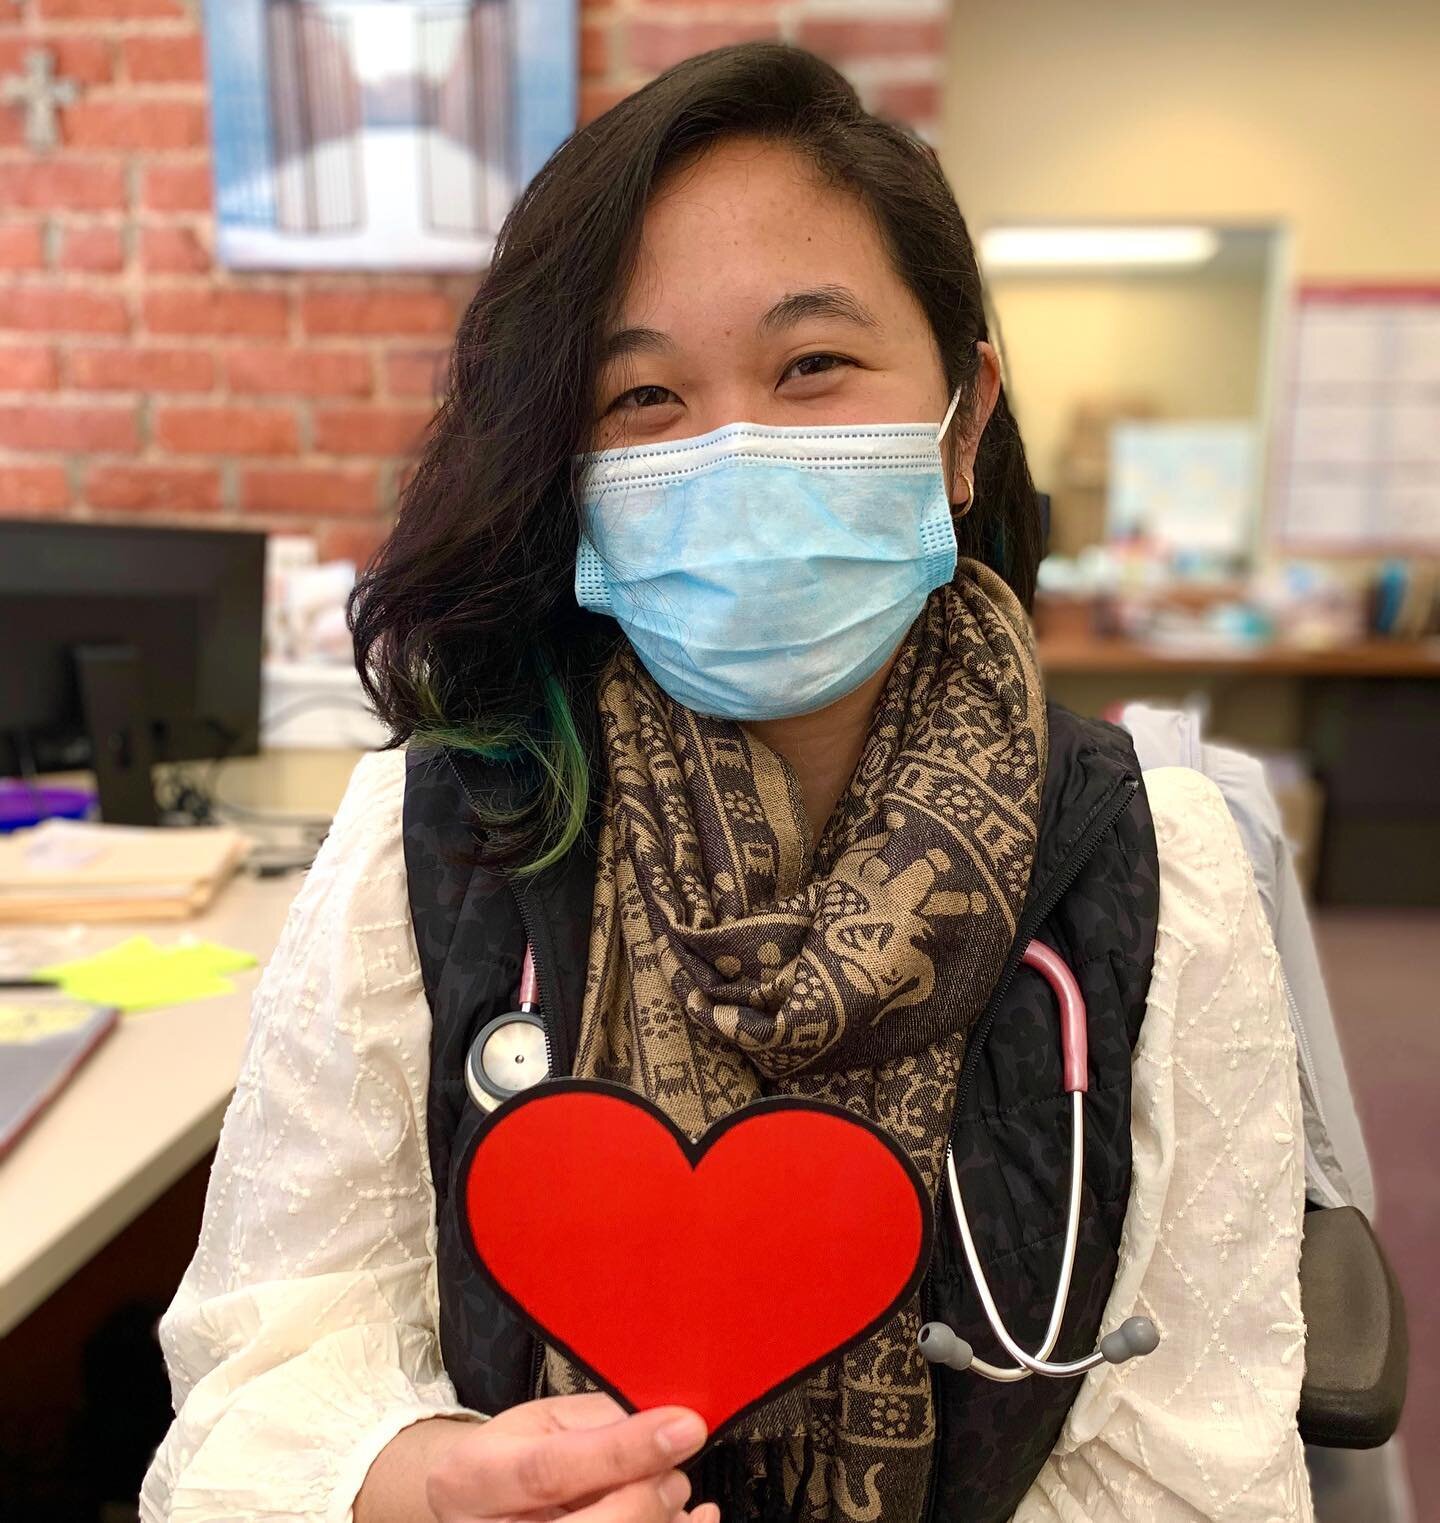 Did you know that 80% of heart attacks and strokes are preventable? Heart attacks and strokes can both occur as a complication of cardiovascular disease. 
.
We asked the staff at the Center &quot;What can you do to lower your risk of developing heart